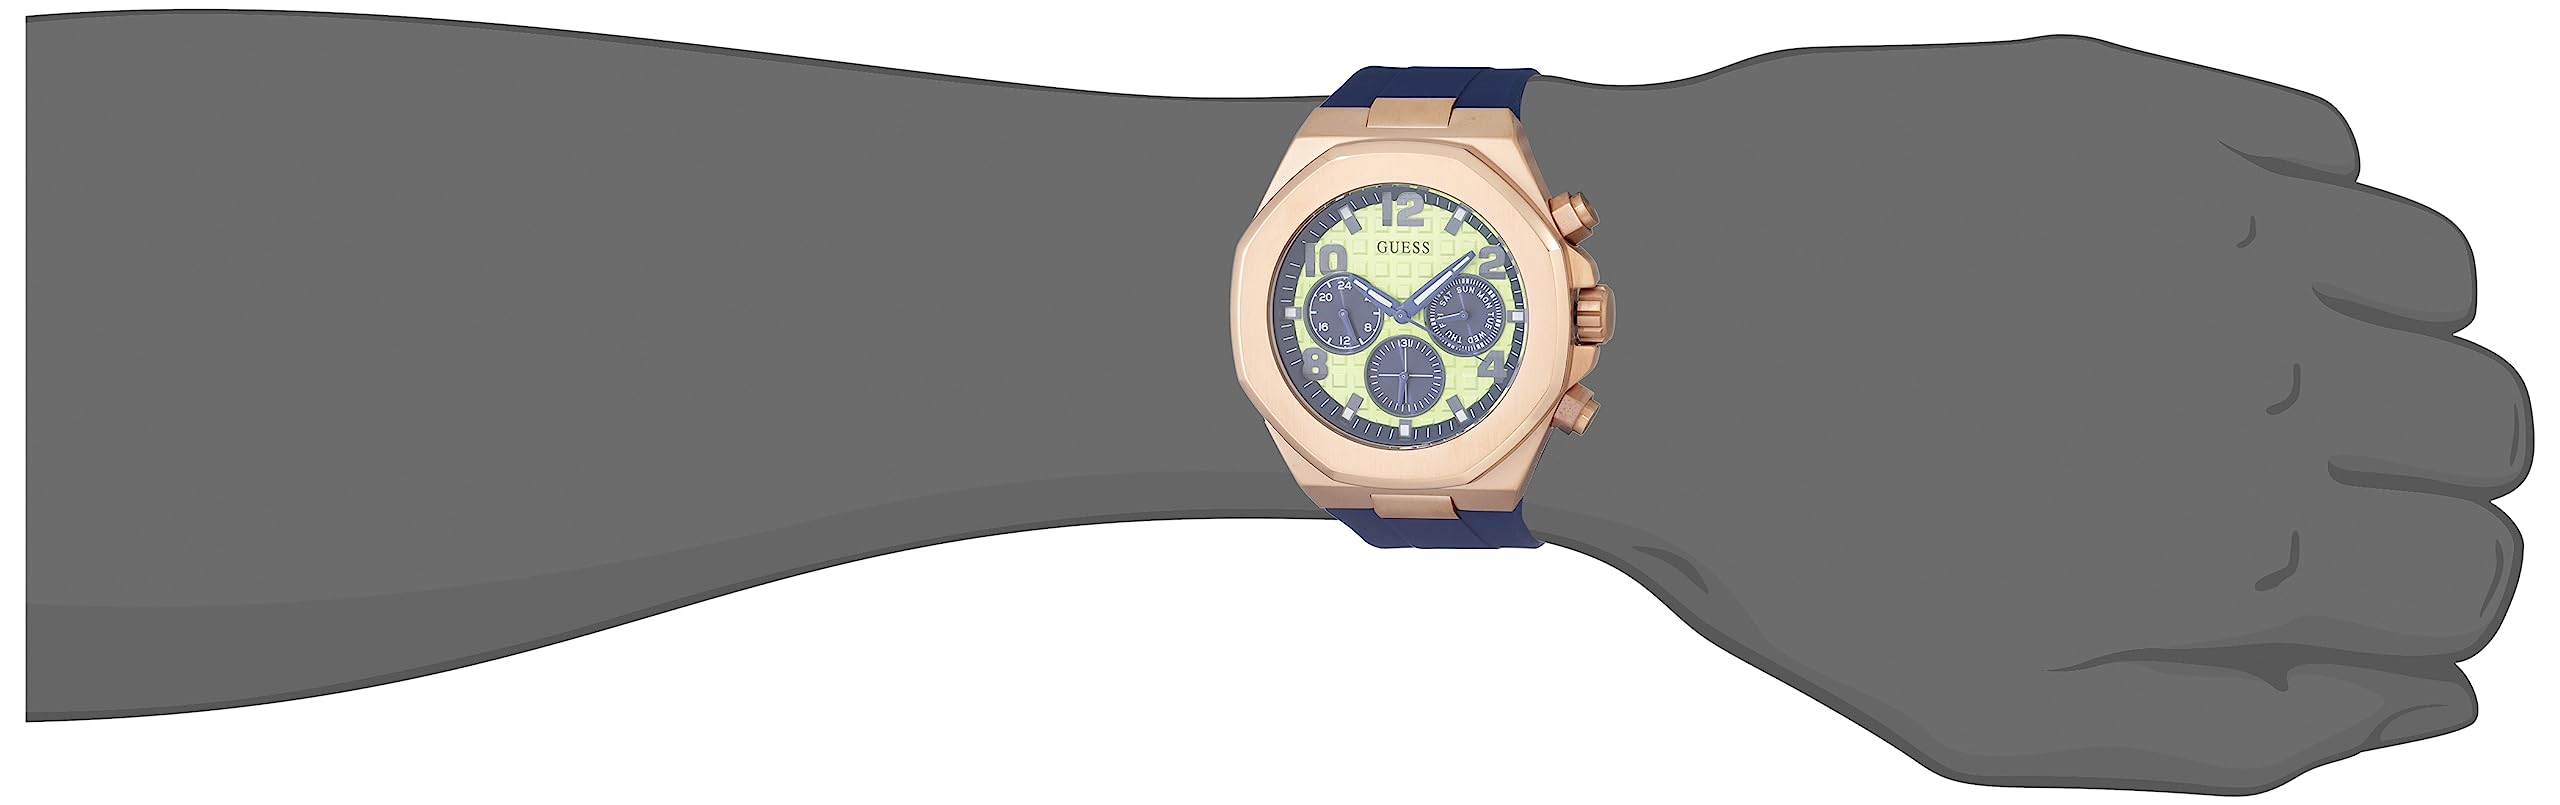 GUESS Men's 46mm Watch - Blue Strap Lime Green Dial Rose Gold Tone Case